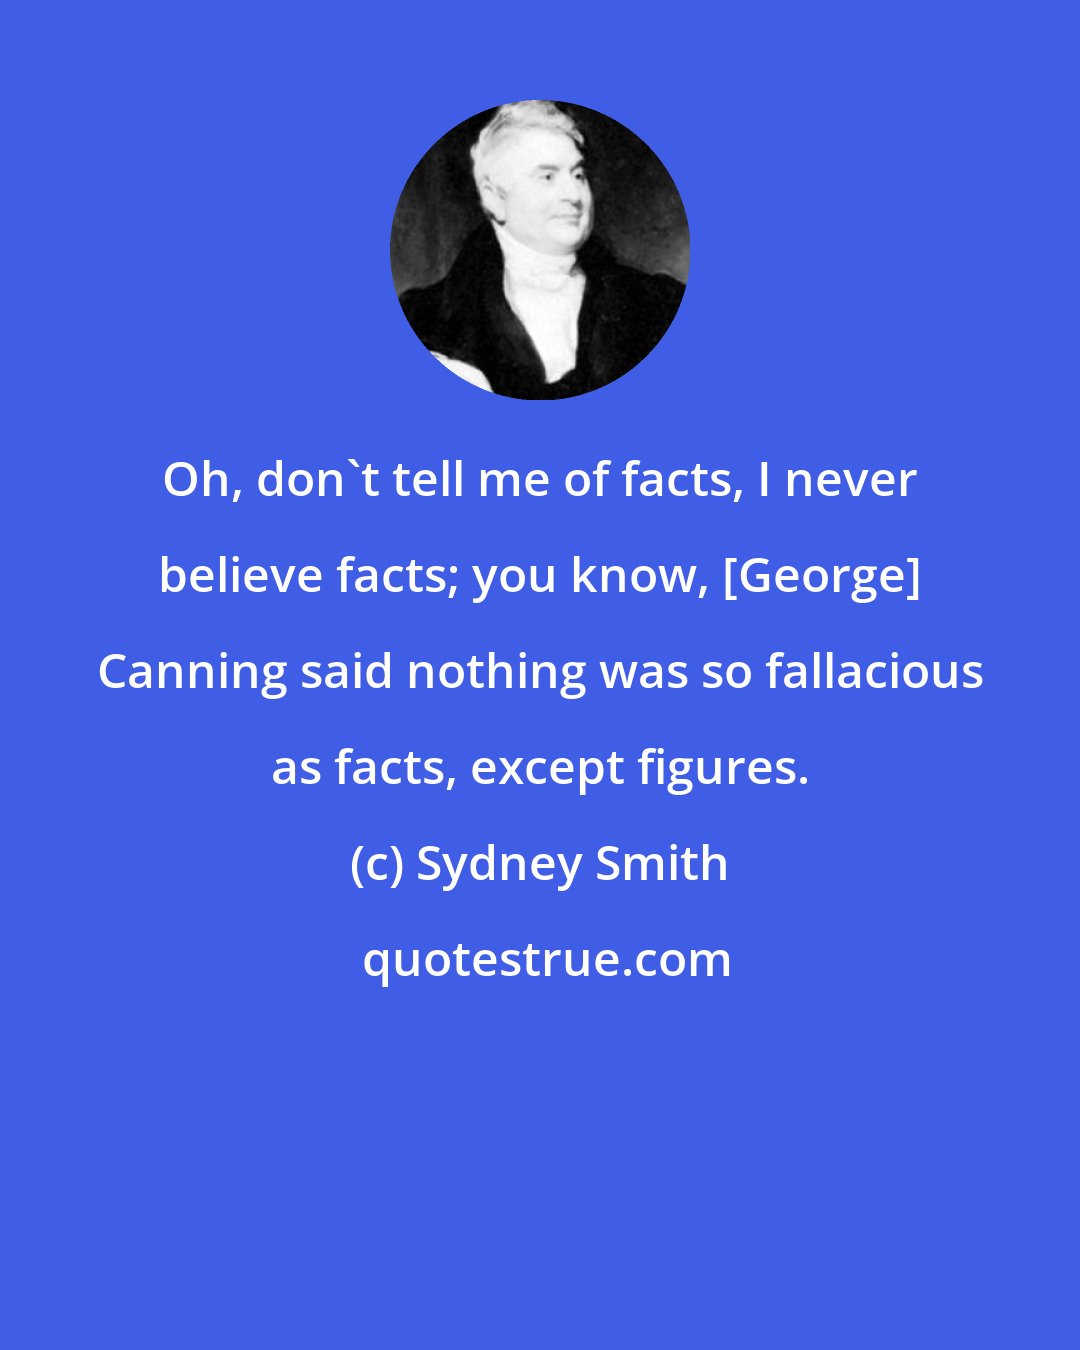 Sydney Smith: Oh, don't tell me of facts, I never believe facts; you know, [George] Canning said nothing was so fallacious as facts, except figures.